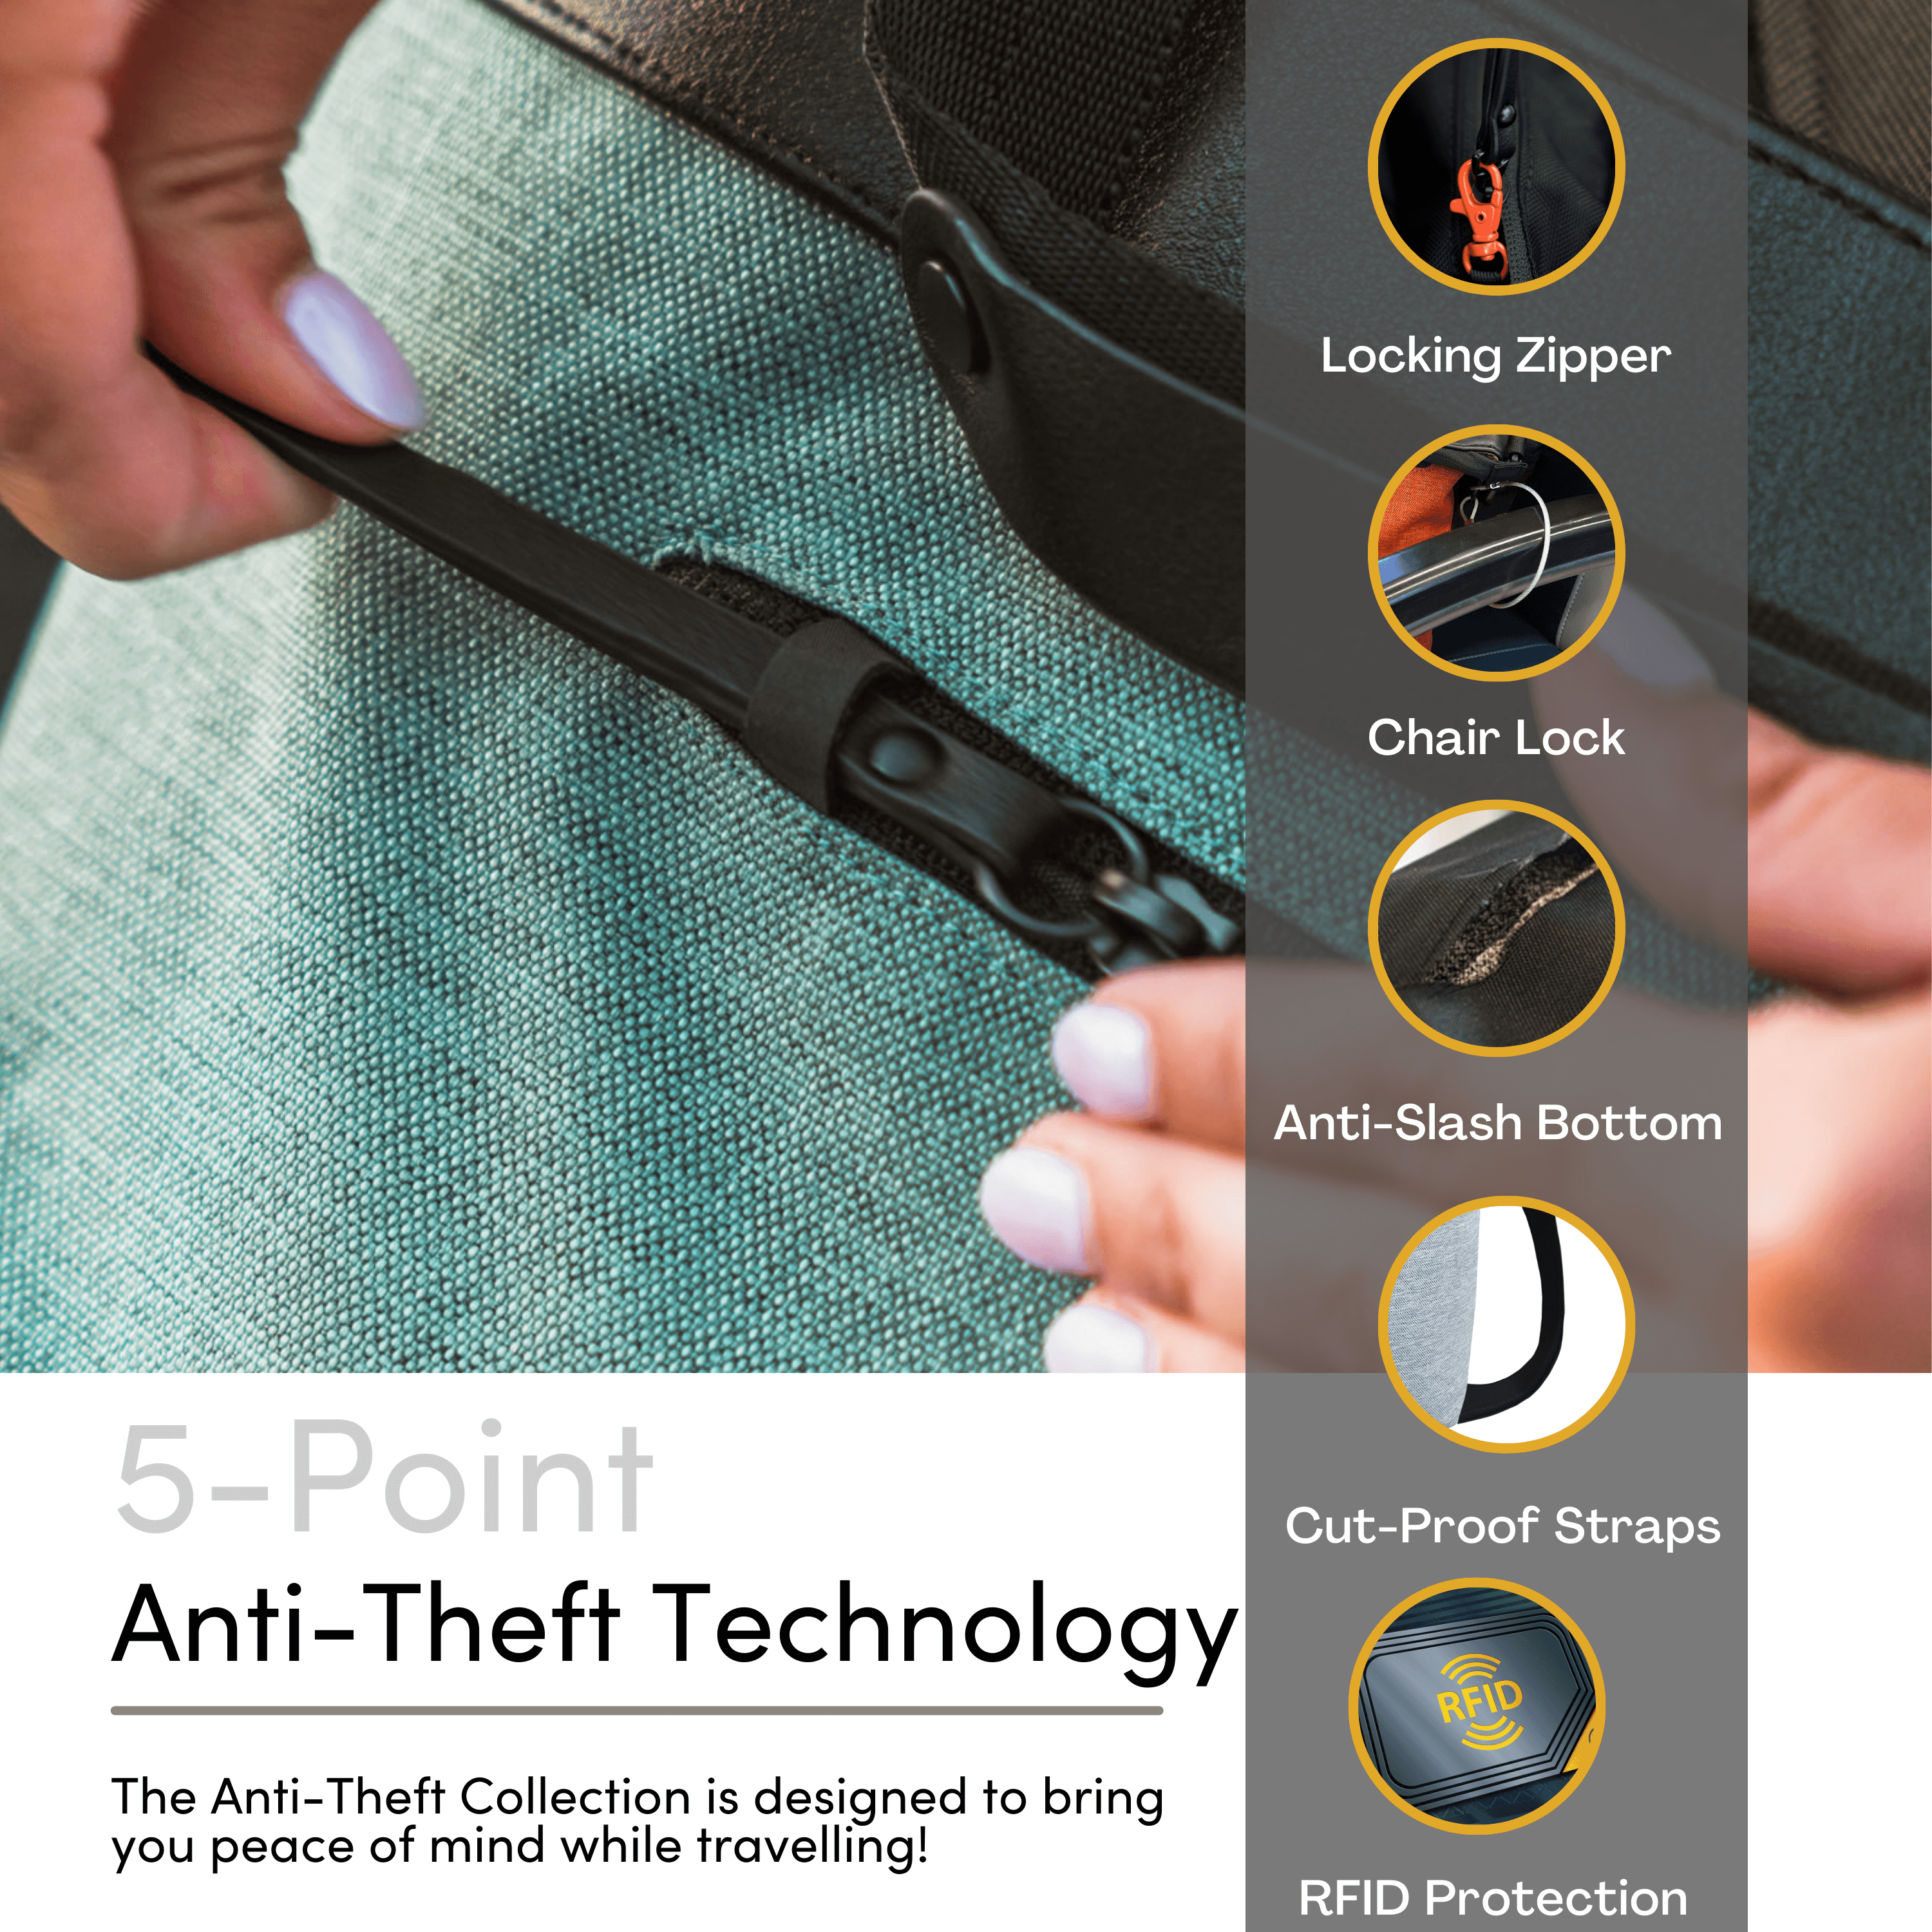 Graphic showing a close up view of a model’s hands demonstrating the zipper lock. Bottom reads “5-Point Anti-Theft Technology” and “The Anti-Theft Collection is designed to bring you peace of mind while traveling!” An overlaying graphic on the right highlights the following features: Locking Zipper, Chair Lock, Anti-Slash Bottom, Cut-Proof Straps and RFID Protection. 